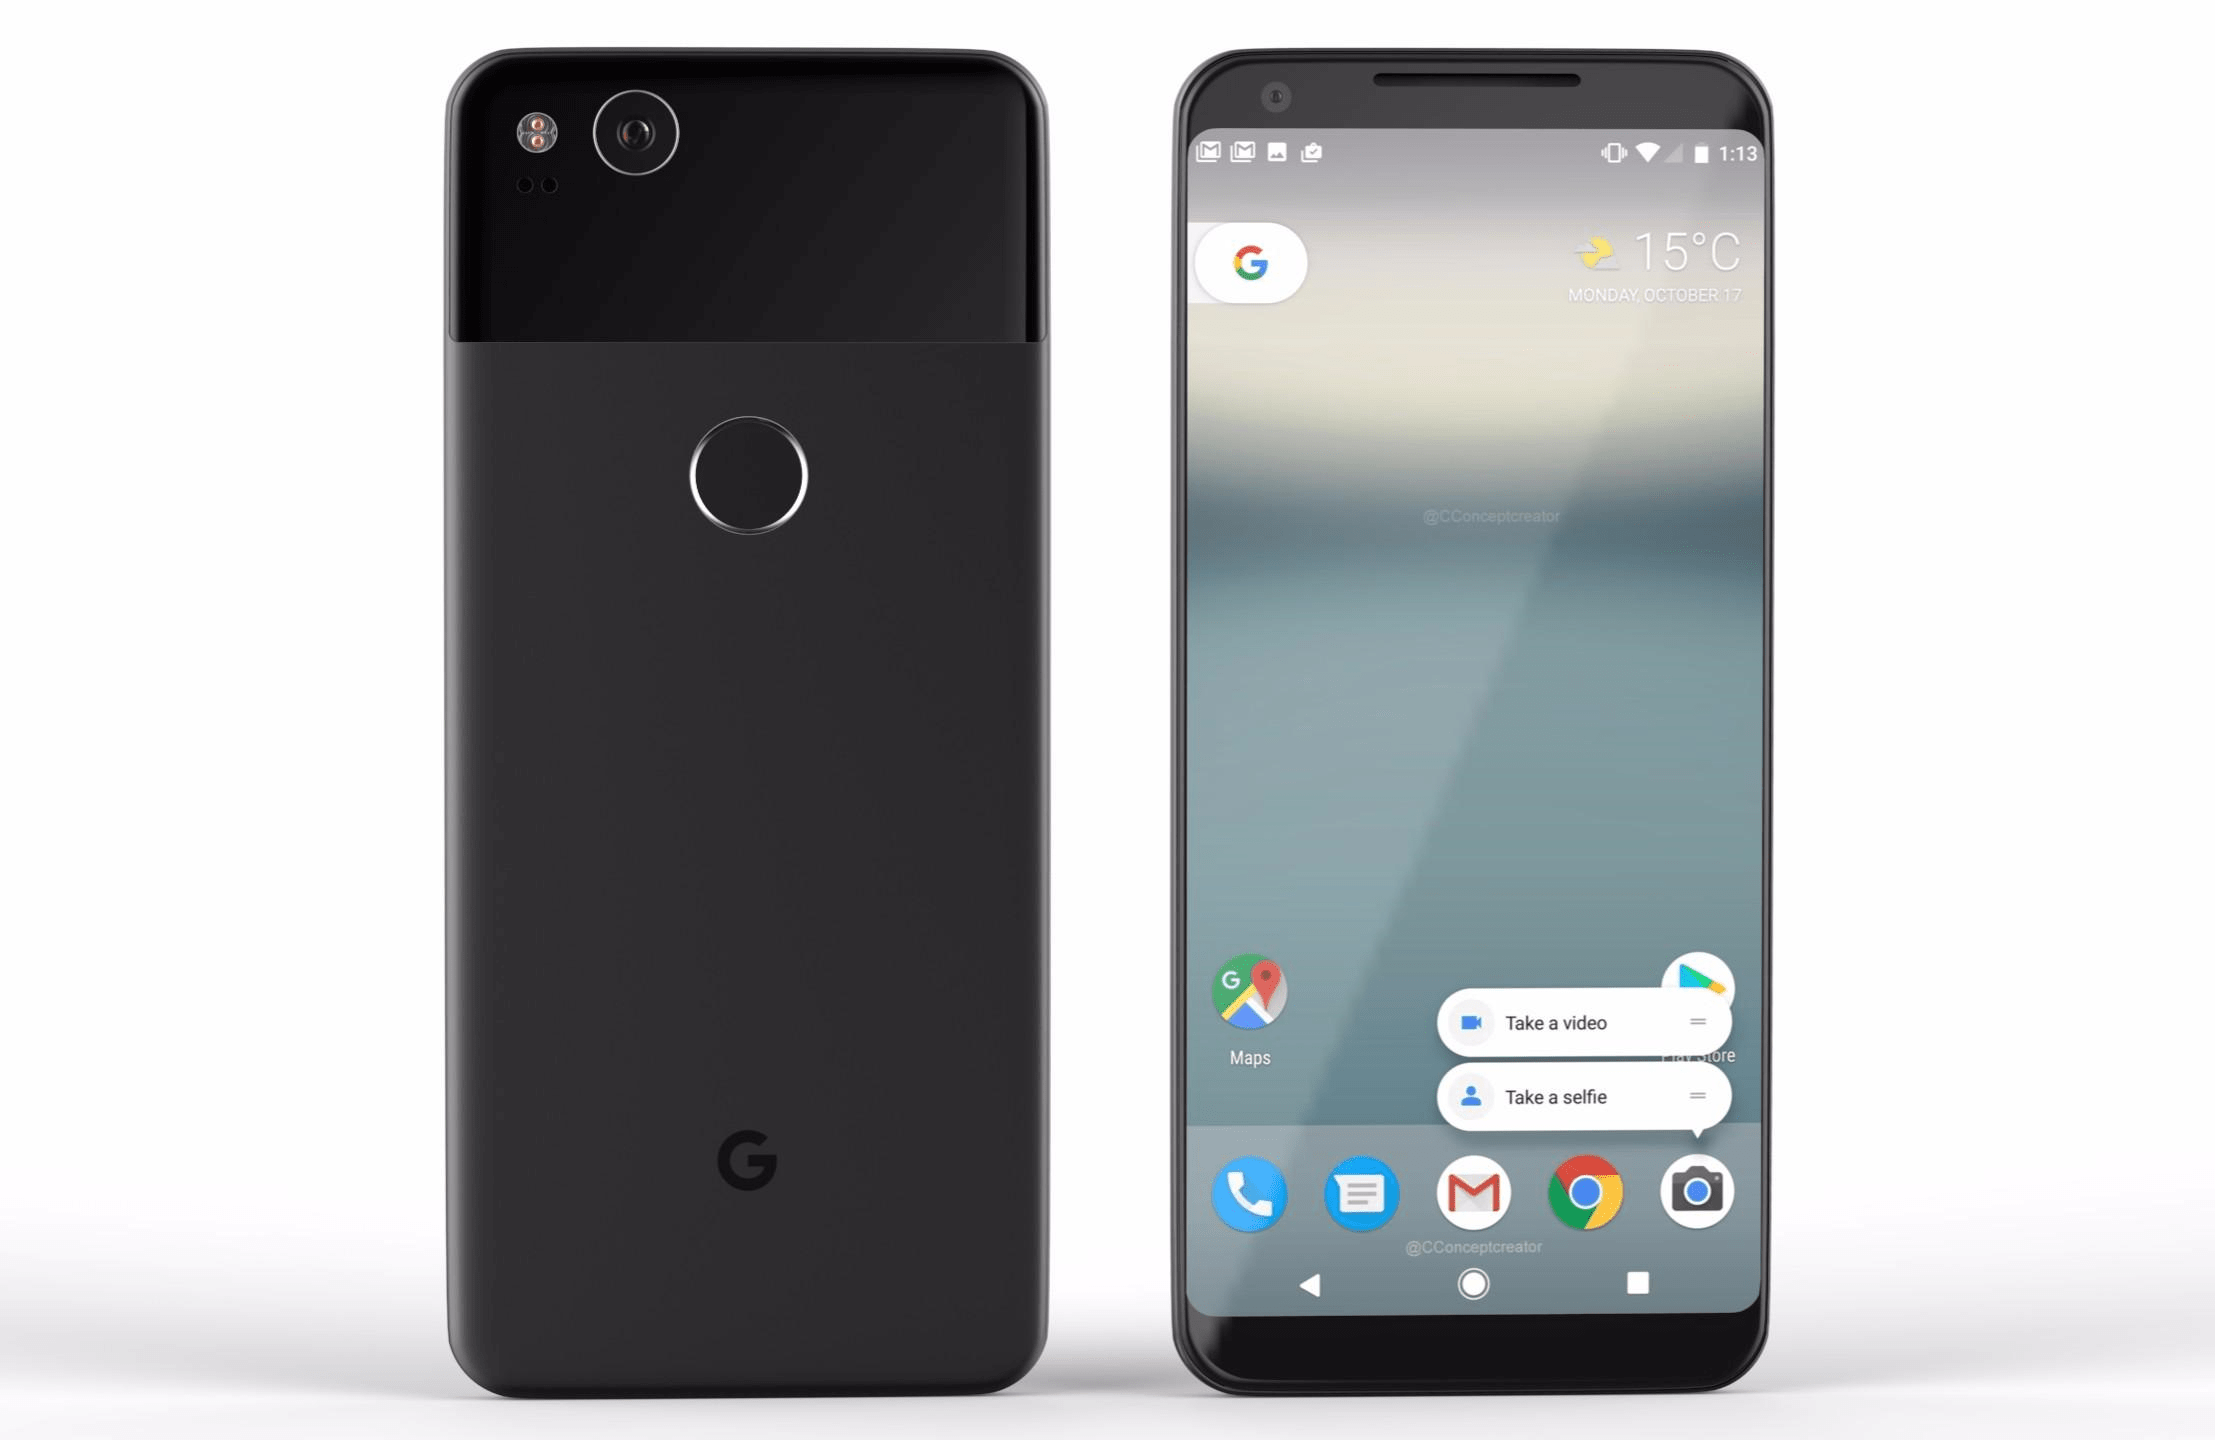 Google Pixel XL 2 - Full Specifications leaked